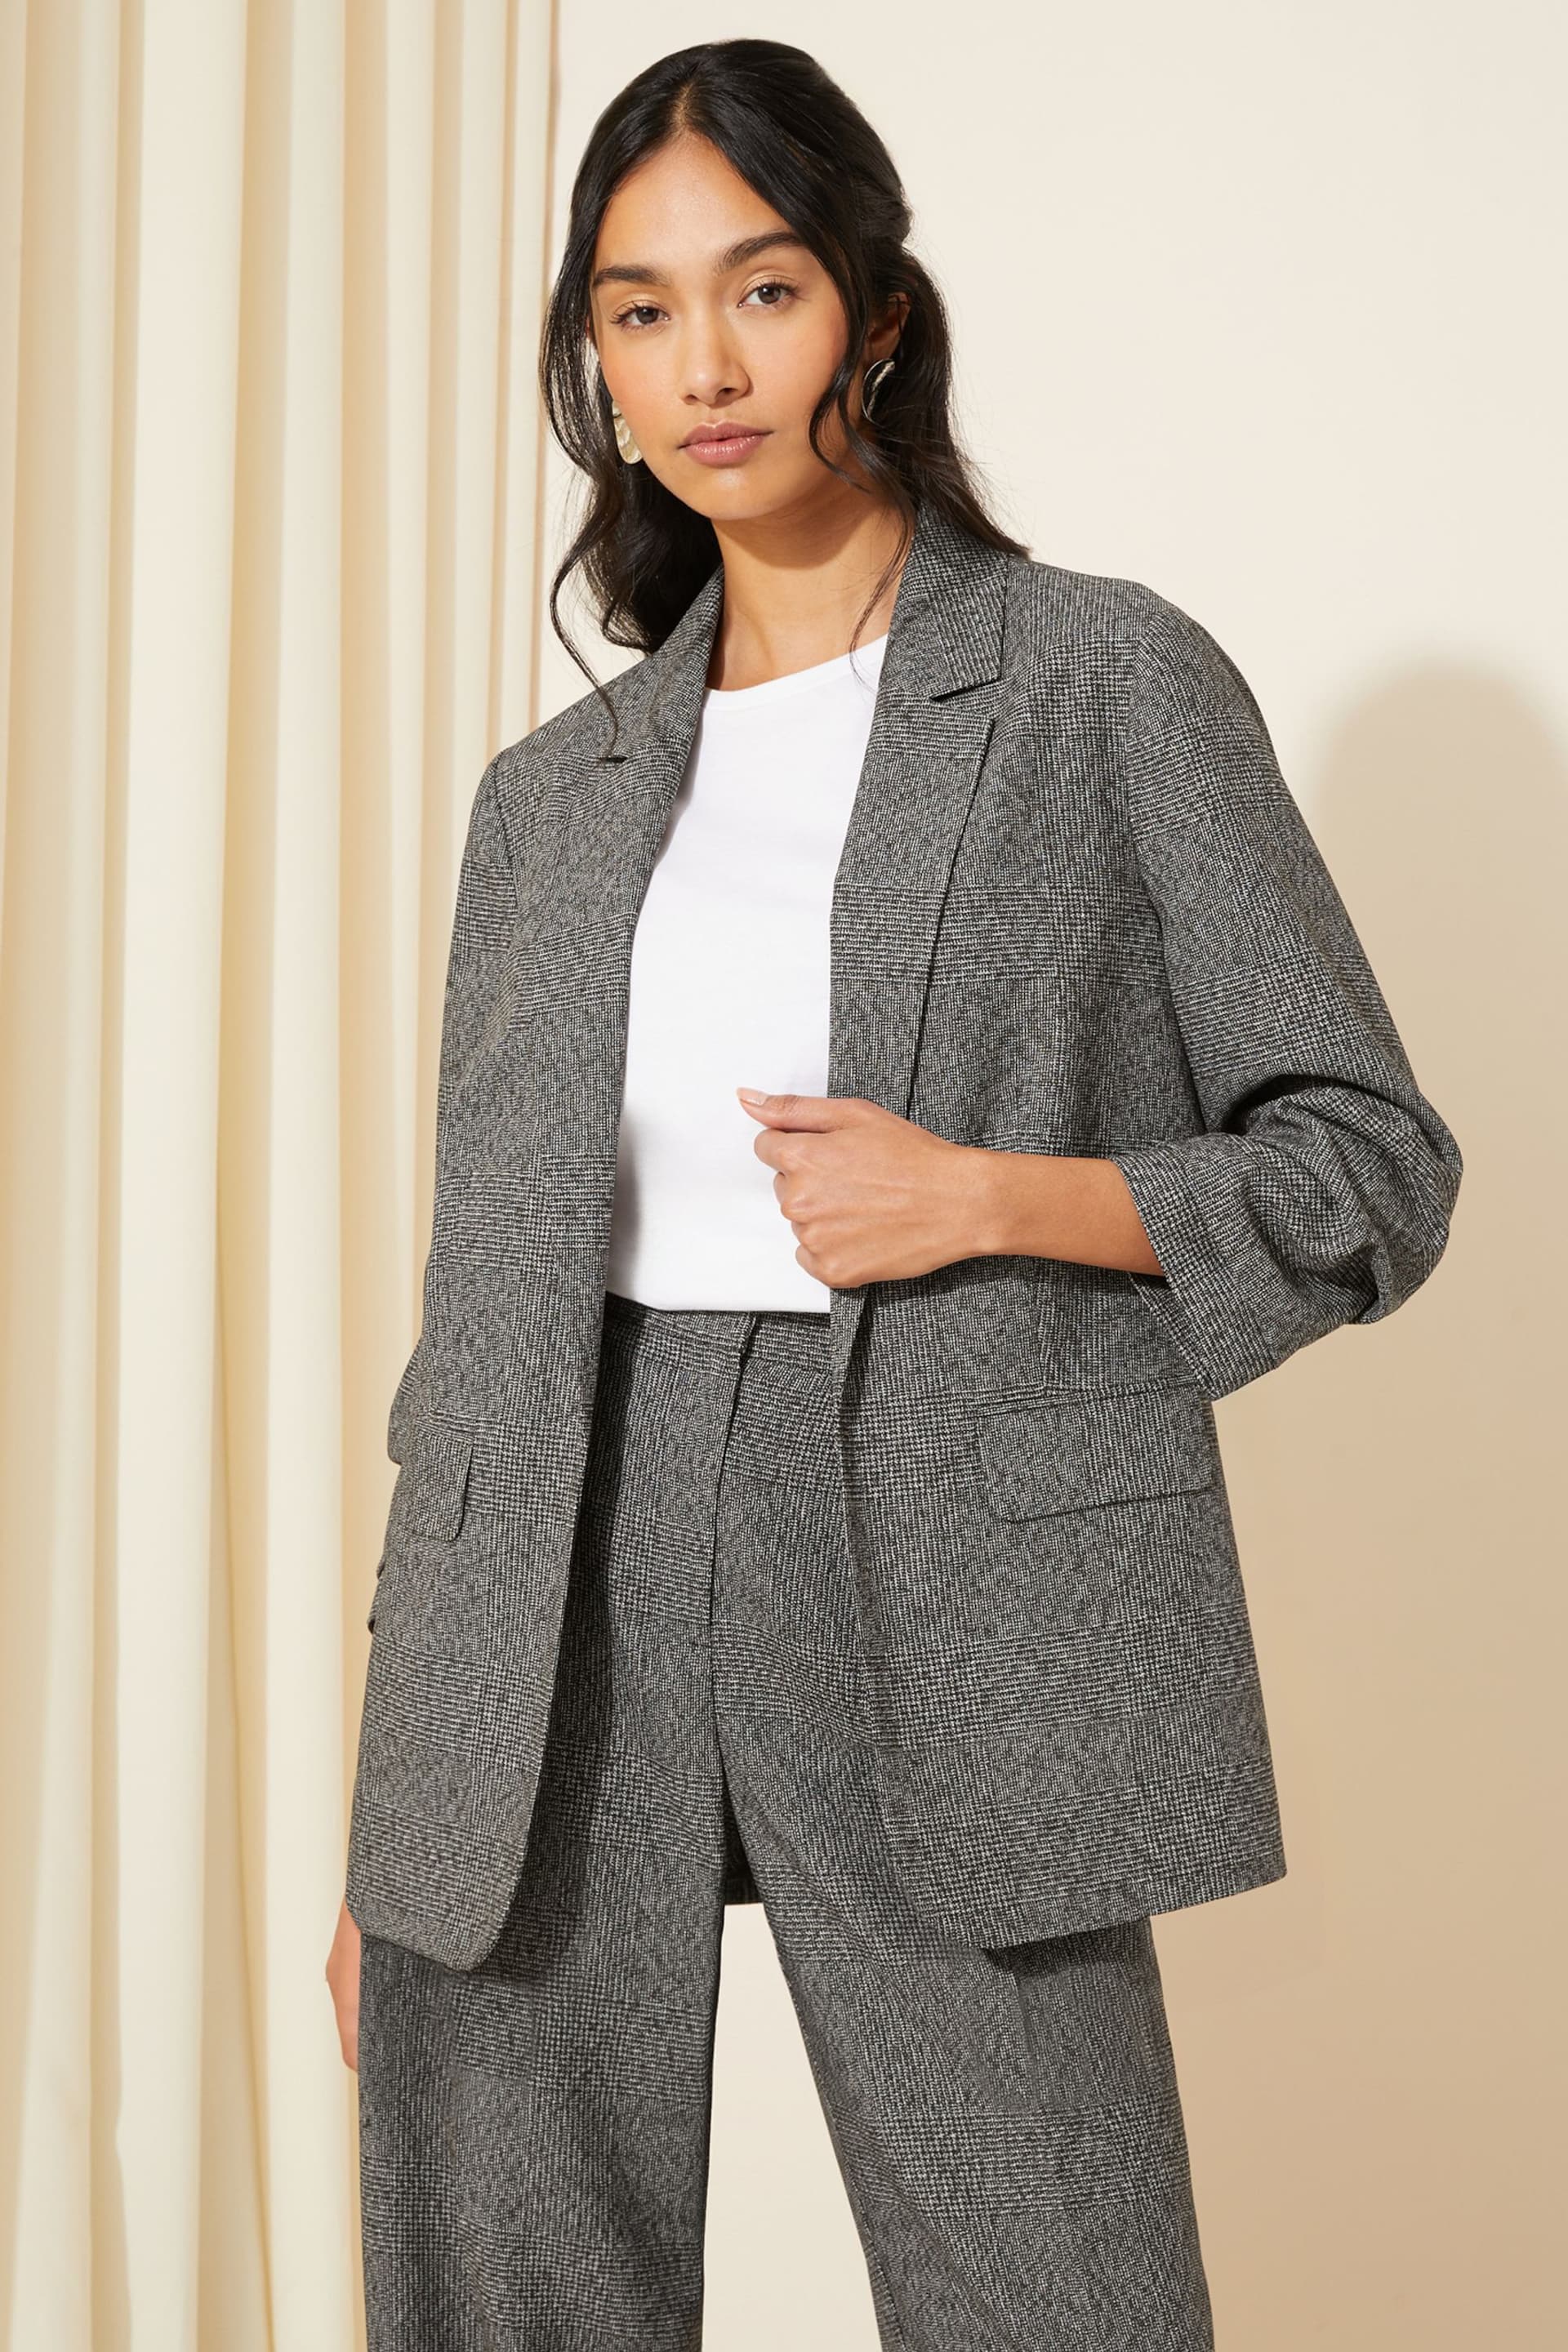 Friends Like These Grey Edge to Edge Tailored Blazer - Image 1 of 4